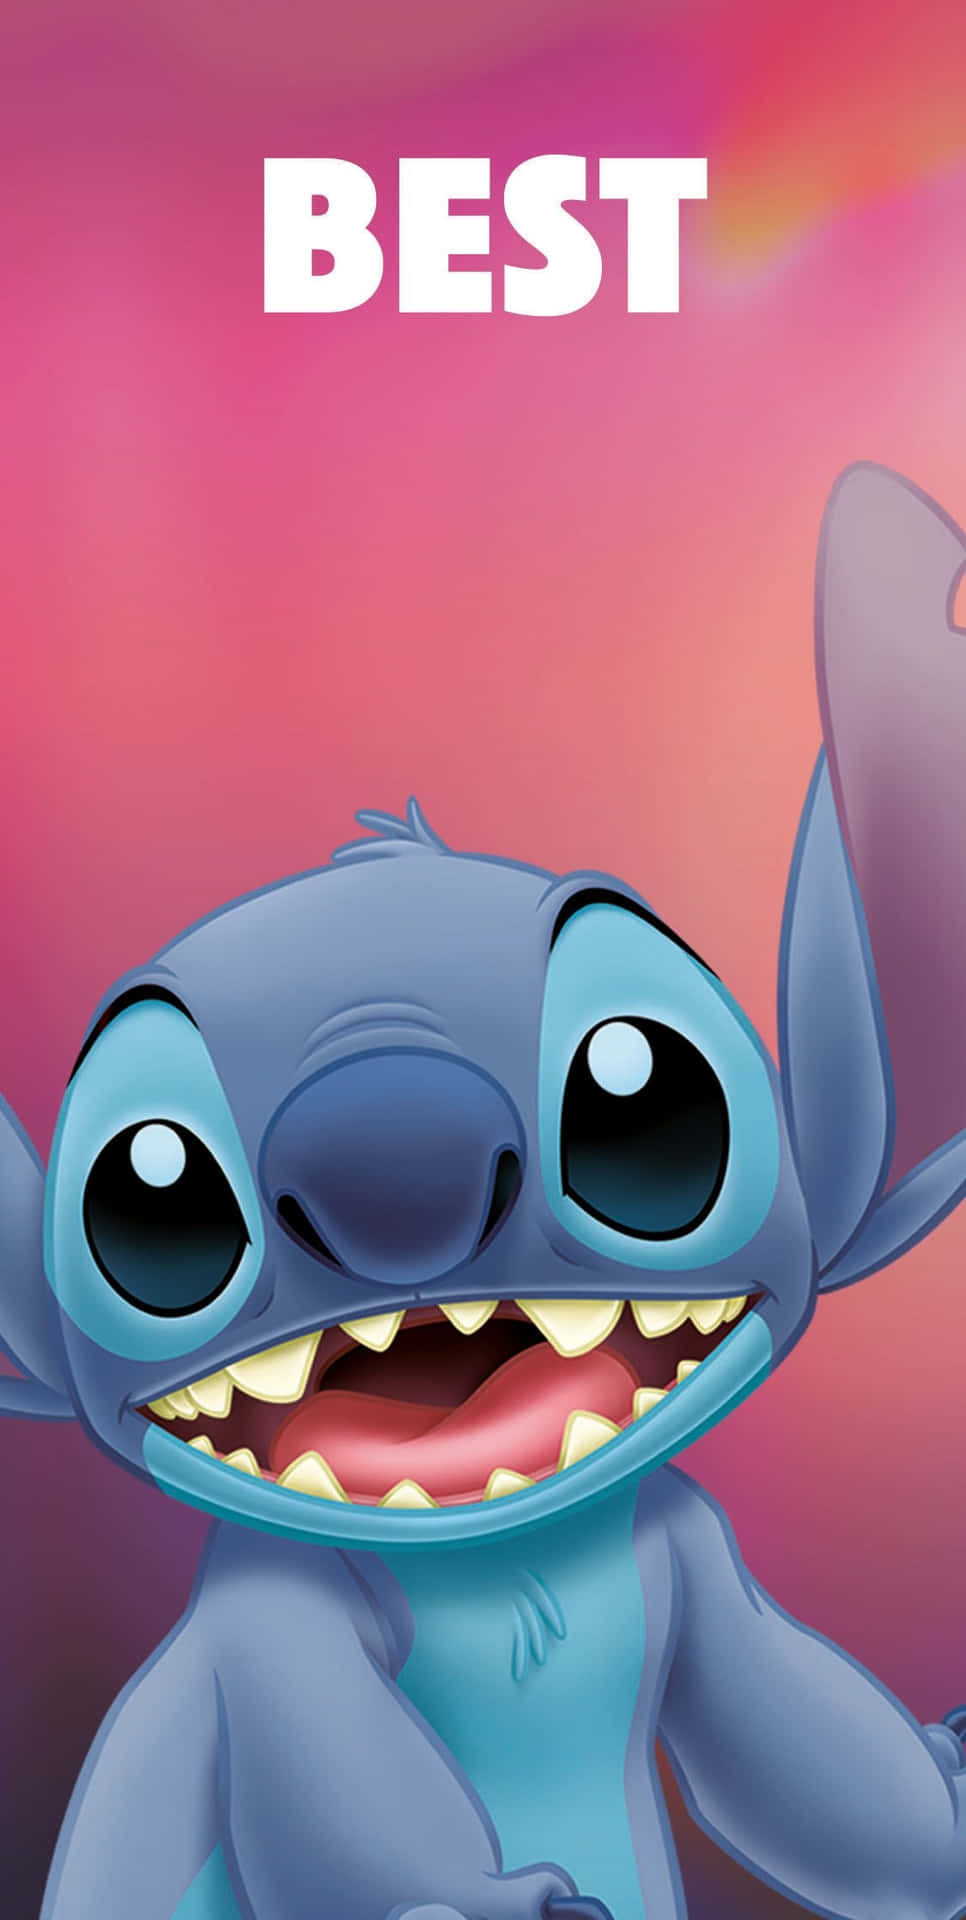 "It's time for some fun with Stitch!"